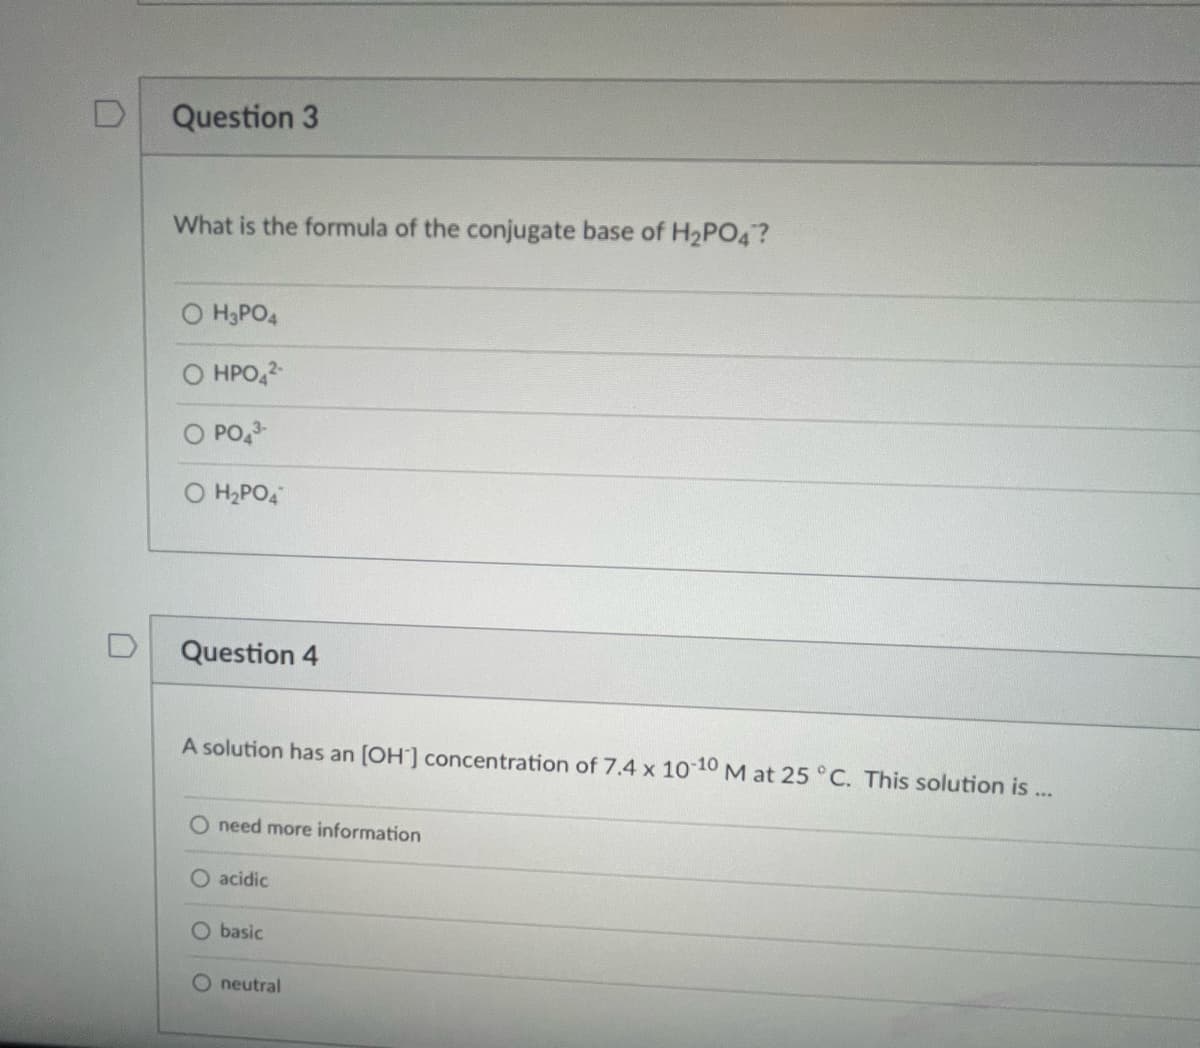 D
Question 3
What is the formula of the conjugate base of H₂PO4?
O H₂PO4
HPO4²-
O PO4³-
H₂PO4
Question 4
A solution has an [OH] concentration of 7.4 x 10-10 M at 25 °C. This solution is
M
O need more information
O acidic
O basic
O neutral